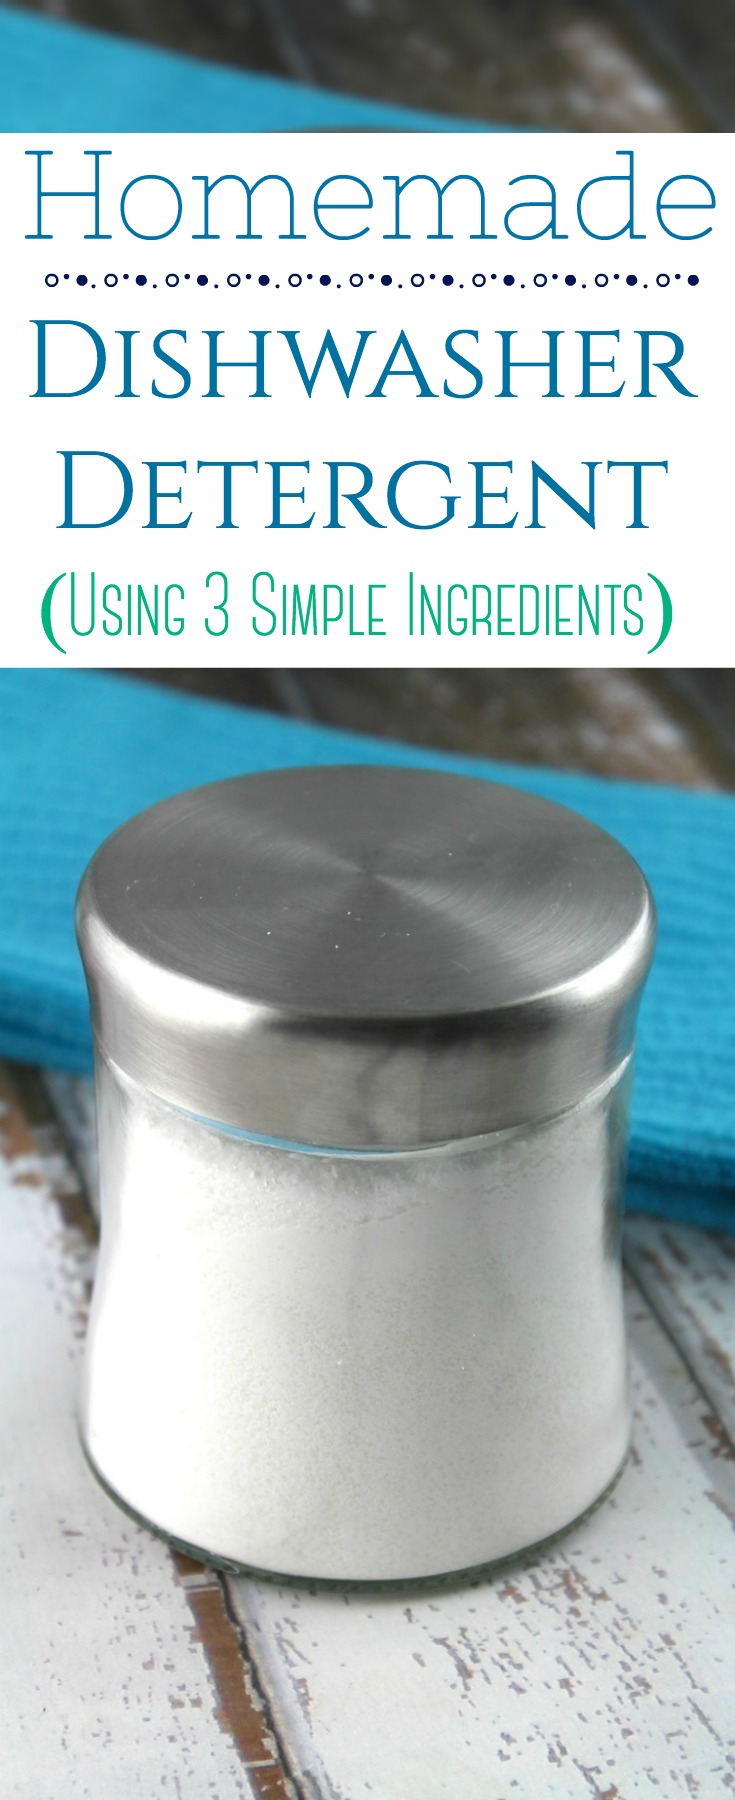 DIY Dishwasher Detergent Powder: Ditch your toxic dishwasher detergent powder or tablets in favor of this DIY dishwasher powder - made with just a few simple ingredients.